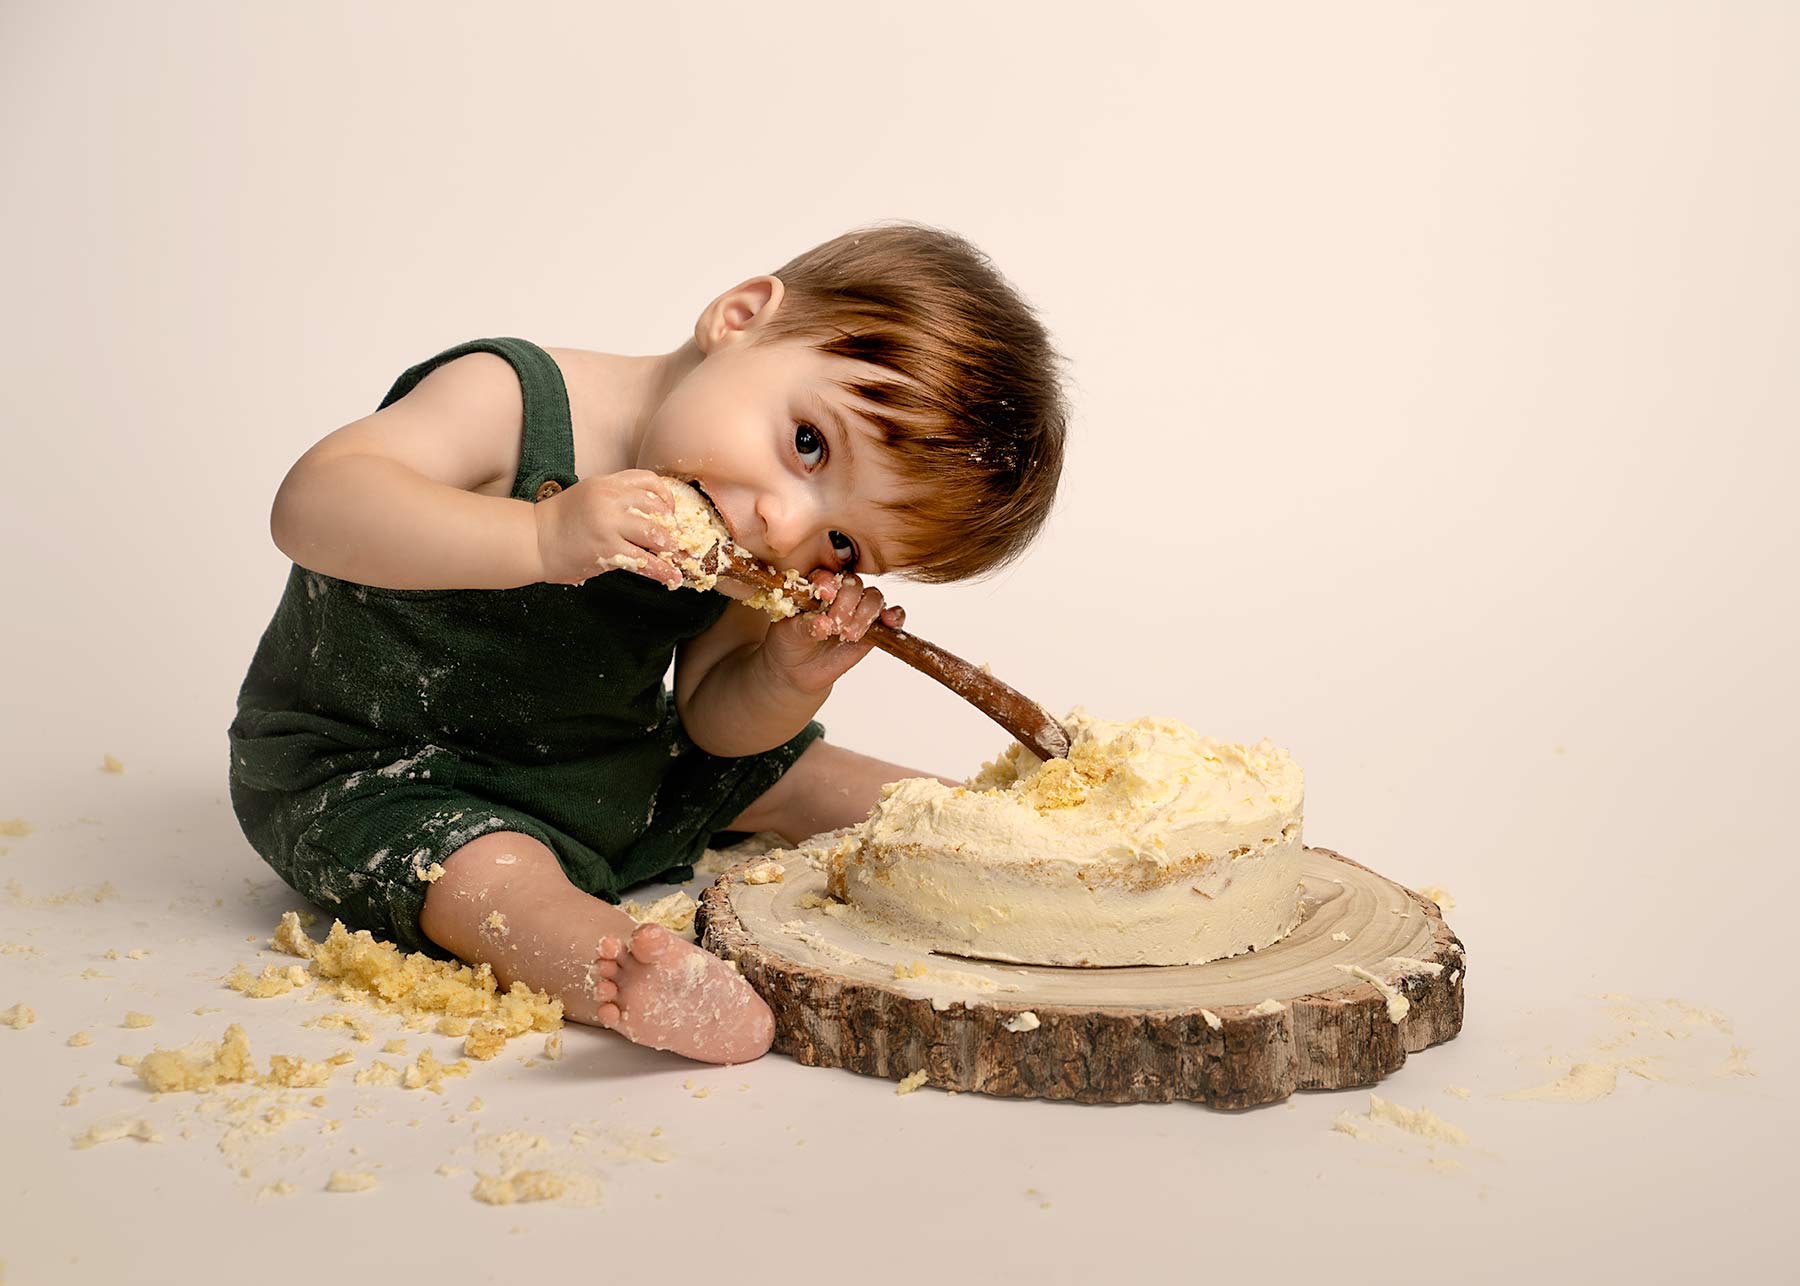 One year old boy in blue romper suit smiling at camera in front of a cake he is about to smash with a wooden spoon.